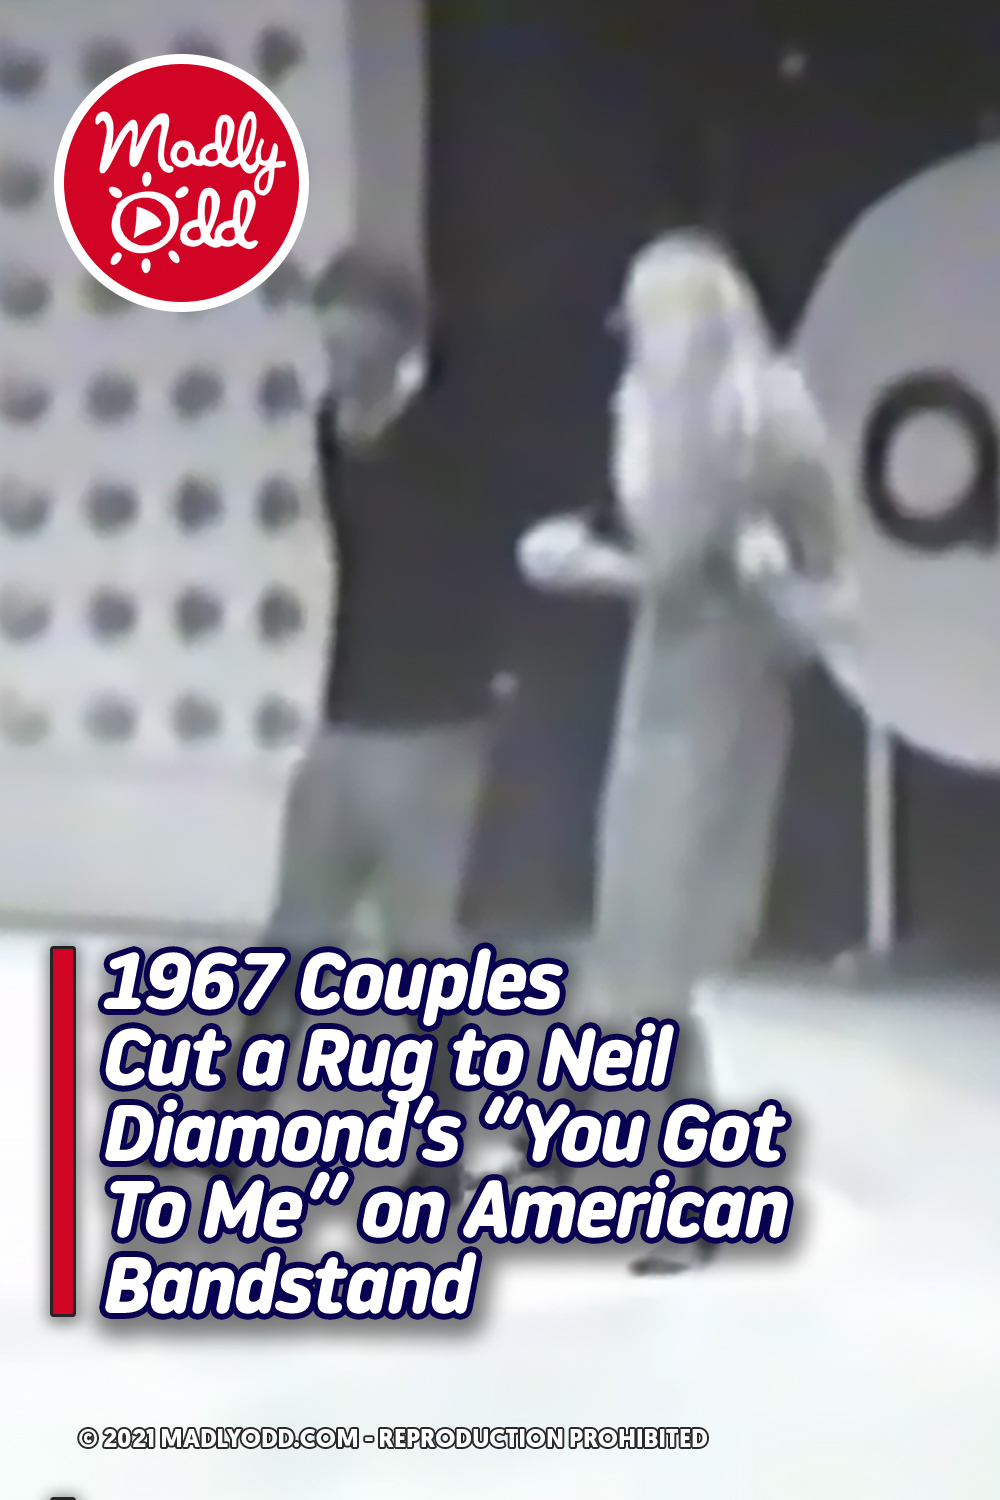 1967 Couples Cut a Rug to Neil Diamond’s “You Got To Me” on American Bandstand